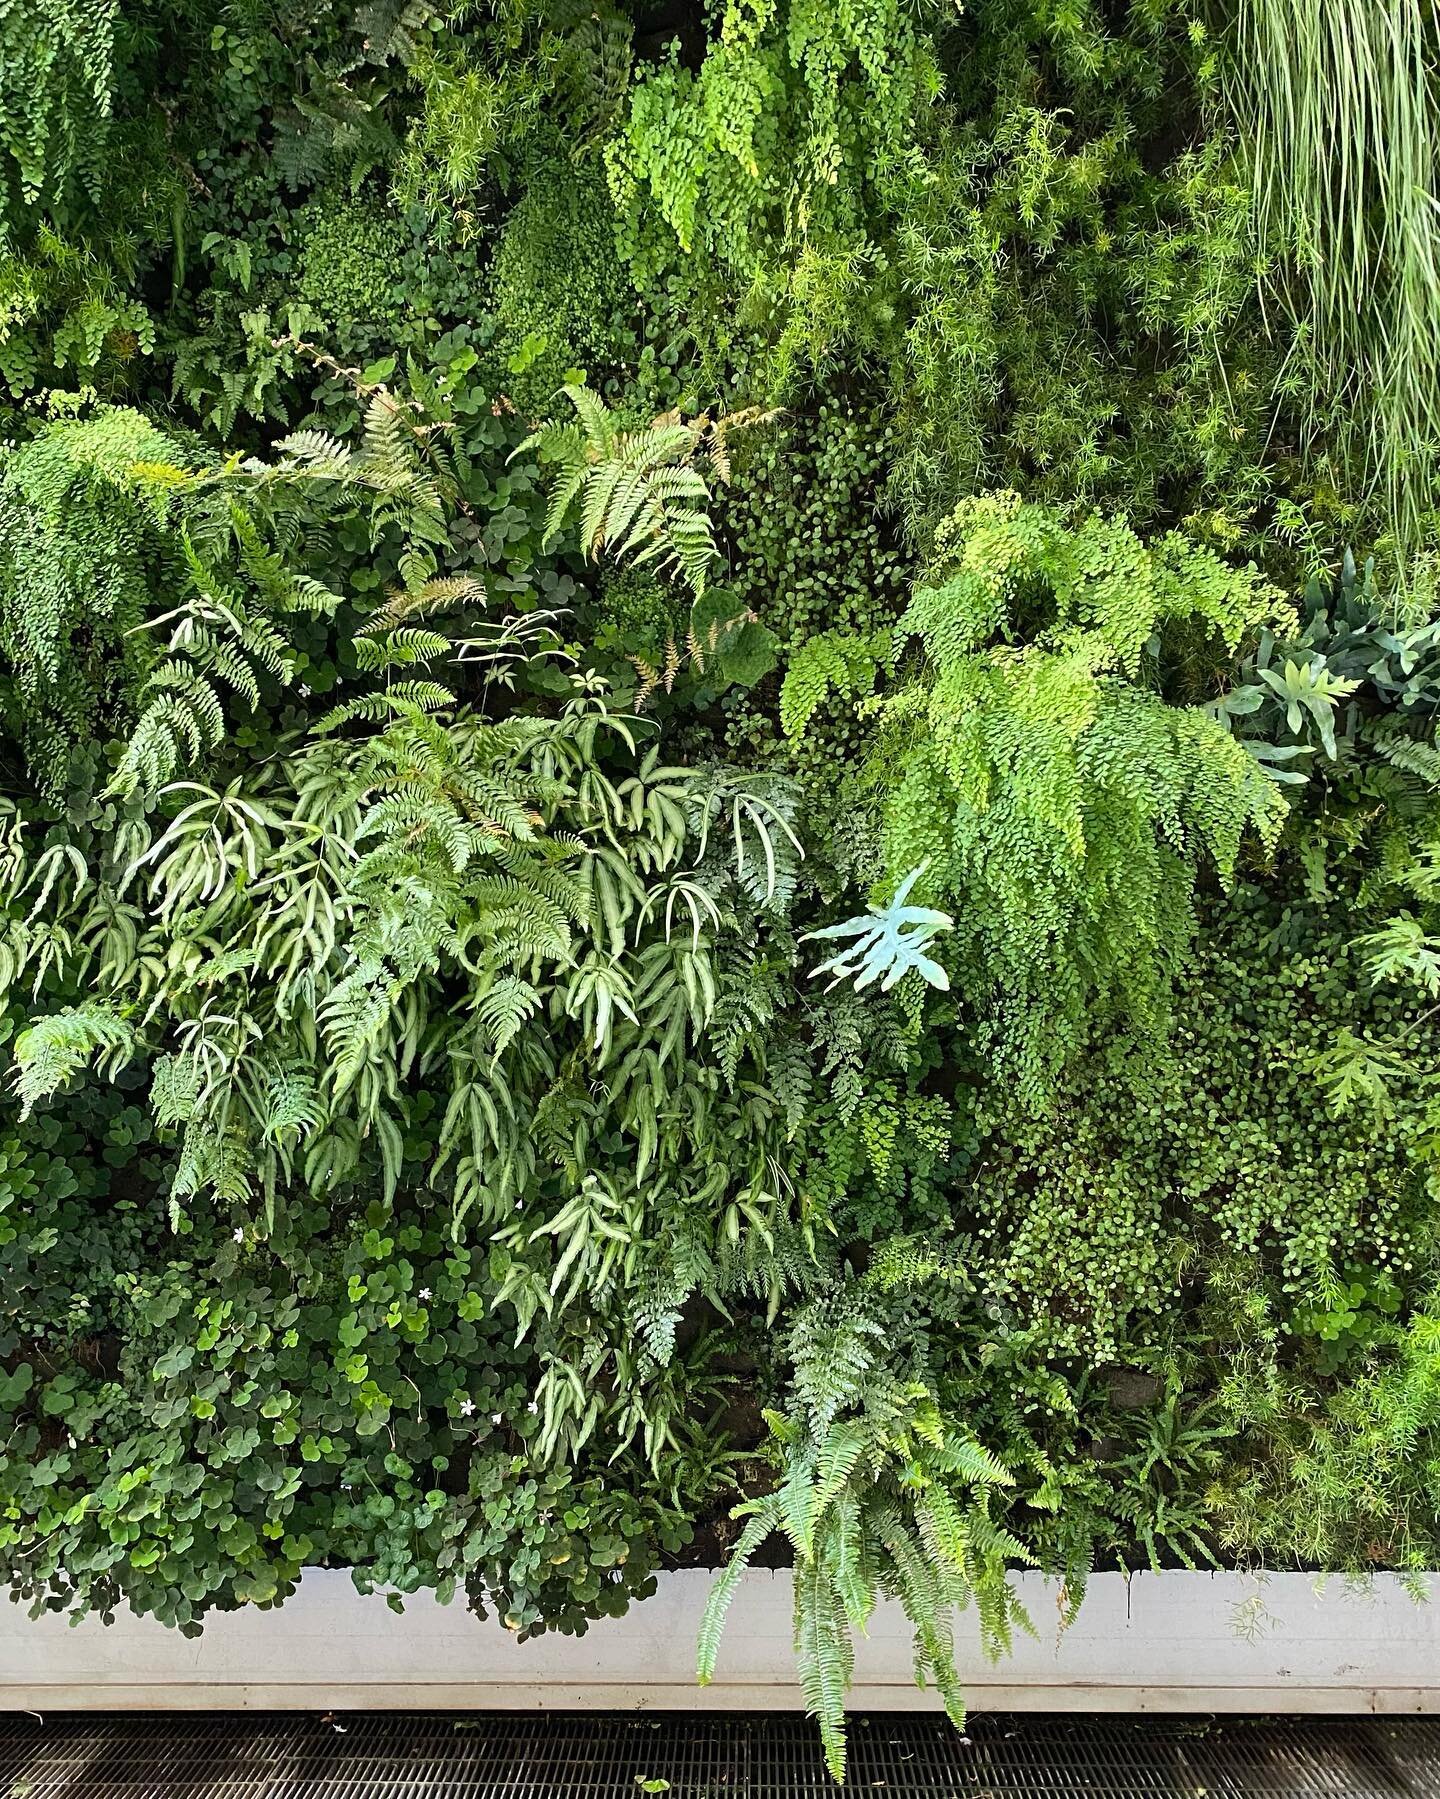 A stop by the living wall is a key part of any visit to @sfmoma for me - in addition to being a mid-gallery exterior breather, the diverse plant palette by @habitat_horticulture constantly shifts and sashays.  The ferns are always vivid and refreshin